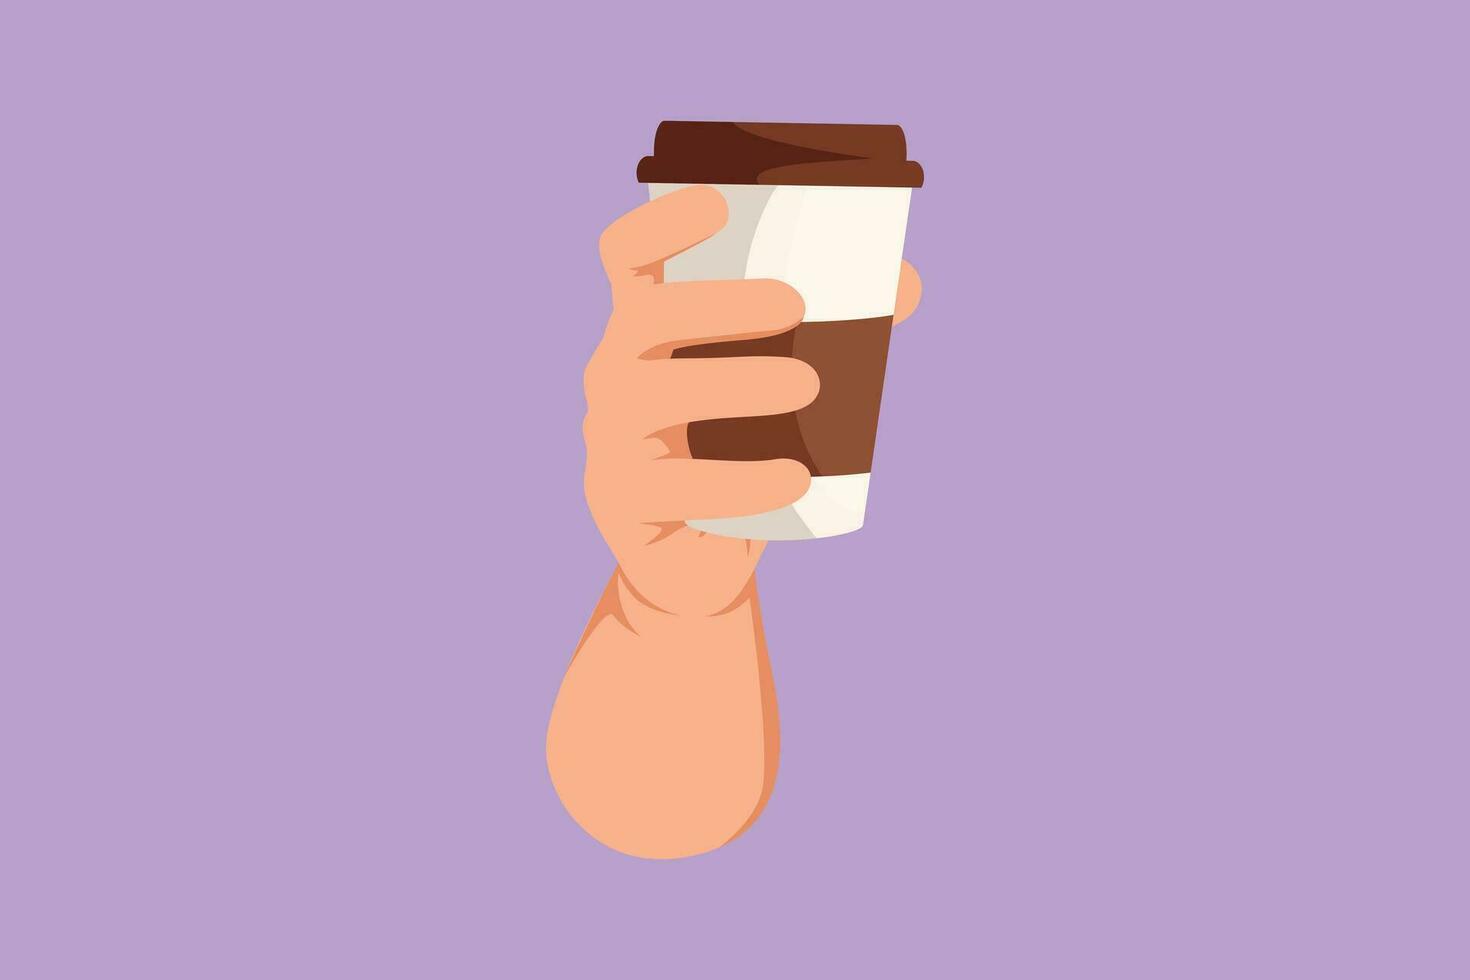 Graphic flat design drawing human hand holding disposable paper cup of hot coffee or tea. Hand holding reusable mug of hot chocolate. Zero waste concept for beverage. Cartoon style vector illustration